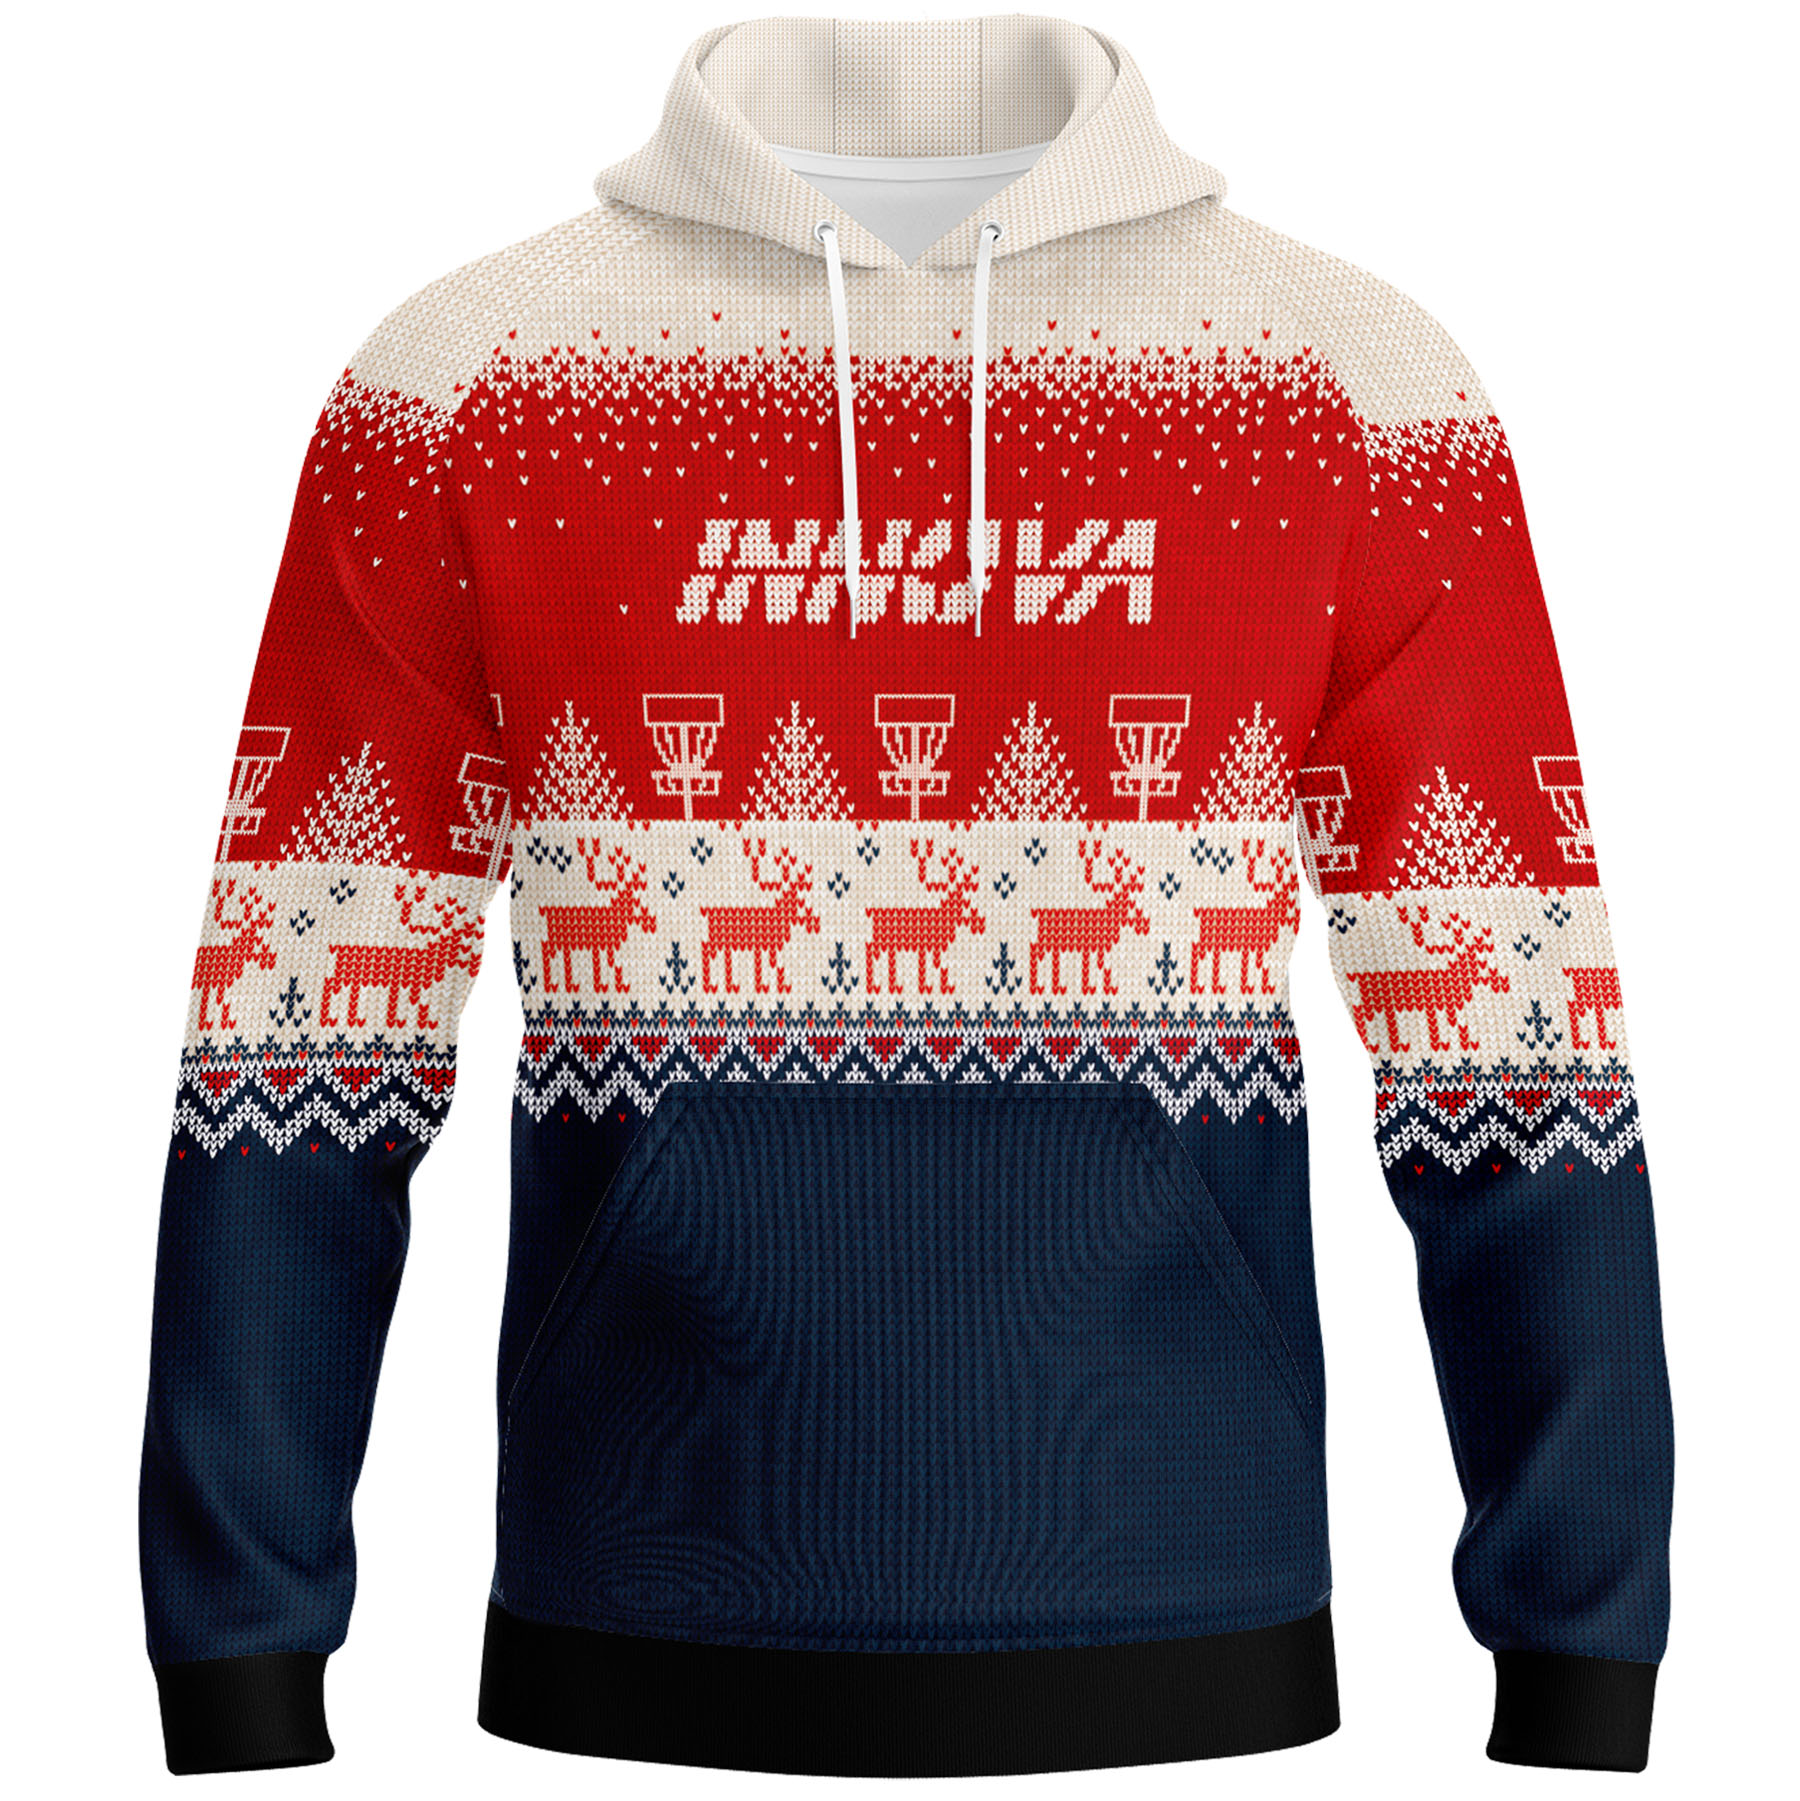 Innova Holiday Sweater Performance Disc Golf Hoodie. White, red, and navy colors. Front view.